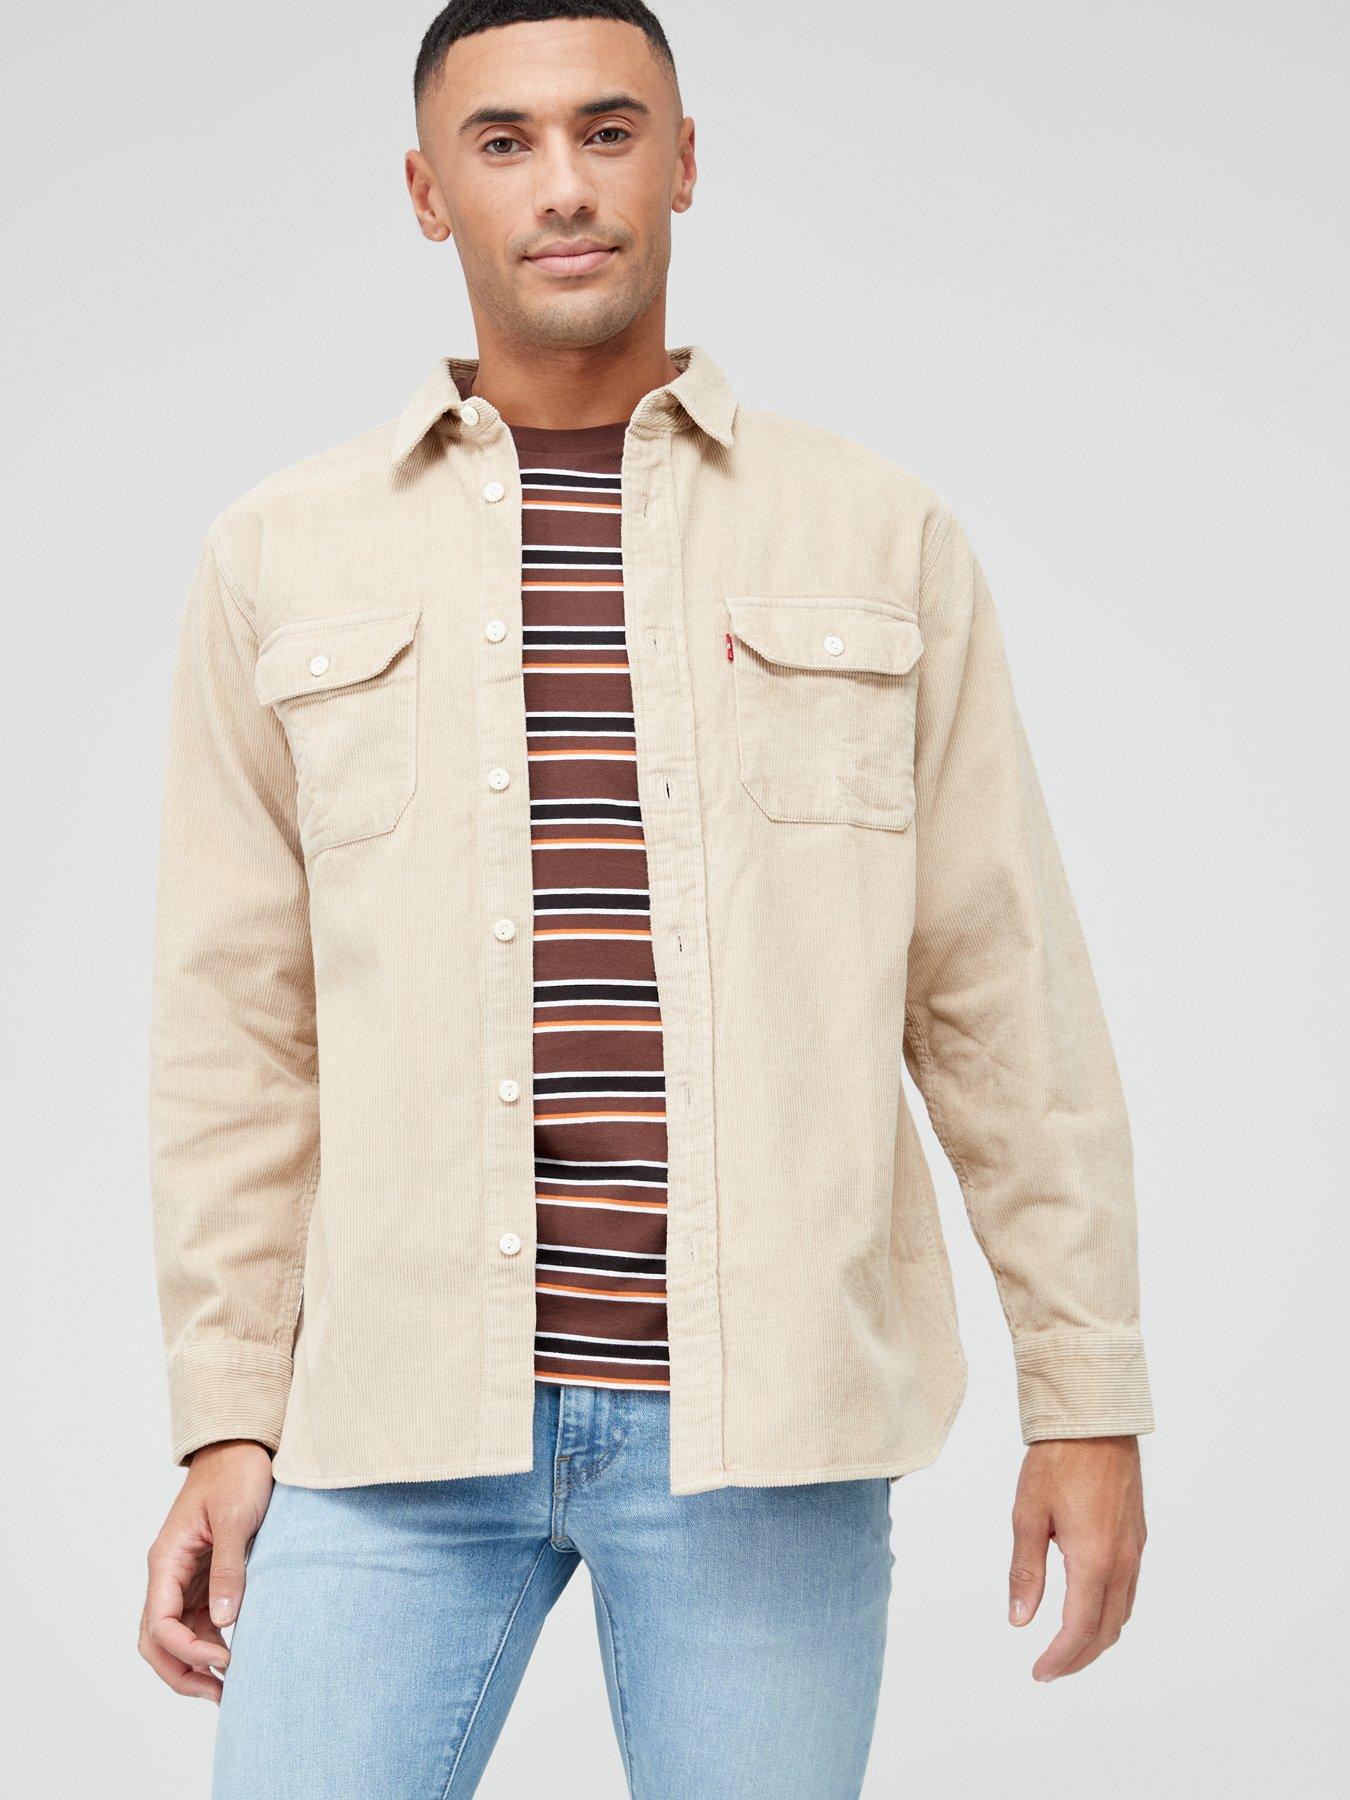 Levi's Classic Worker Overshirt - Brown 